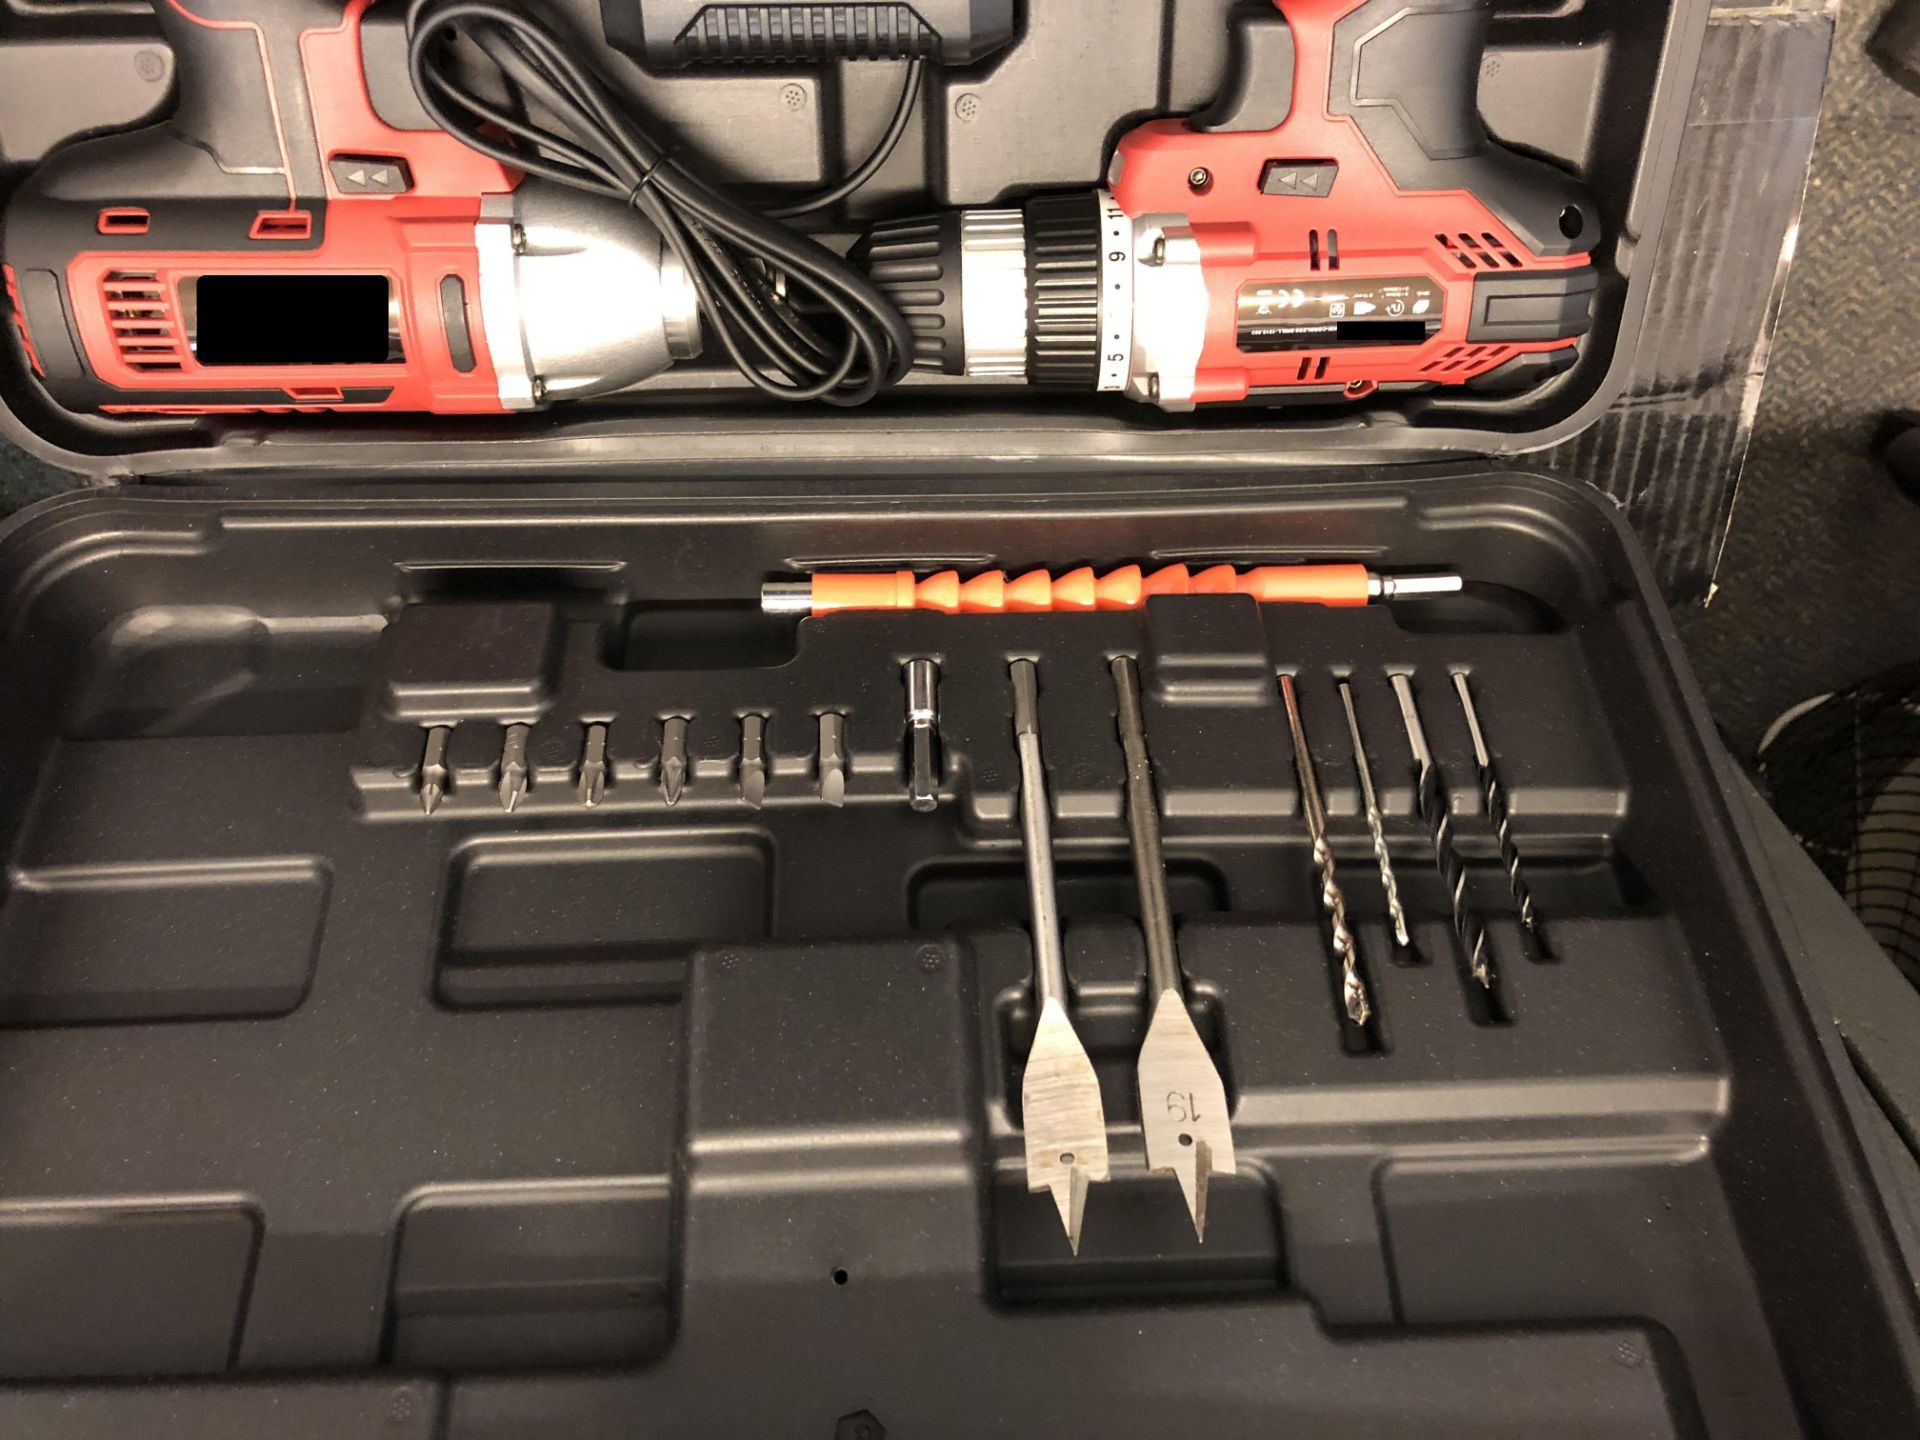 V Brand New 36V Twin Pack Cordless Drill/Driver And Cordless Impact Driver - 1 Hour Charge - 3.0Ah - Image 2 of 4